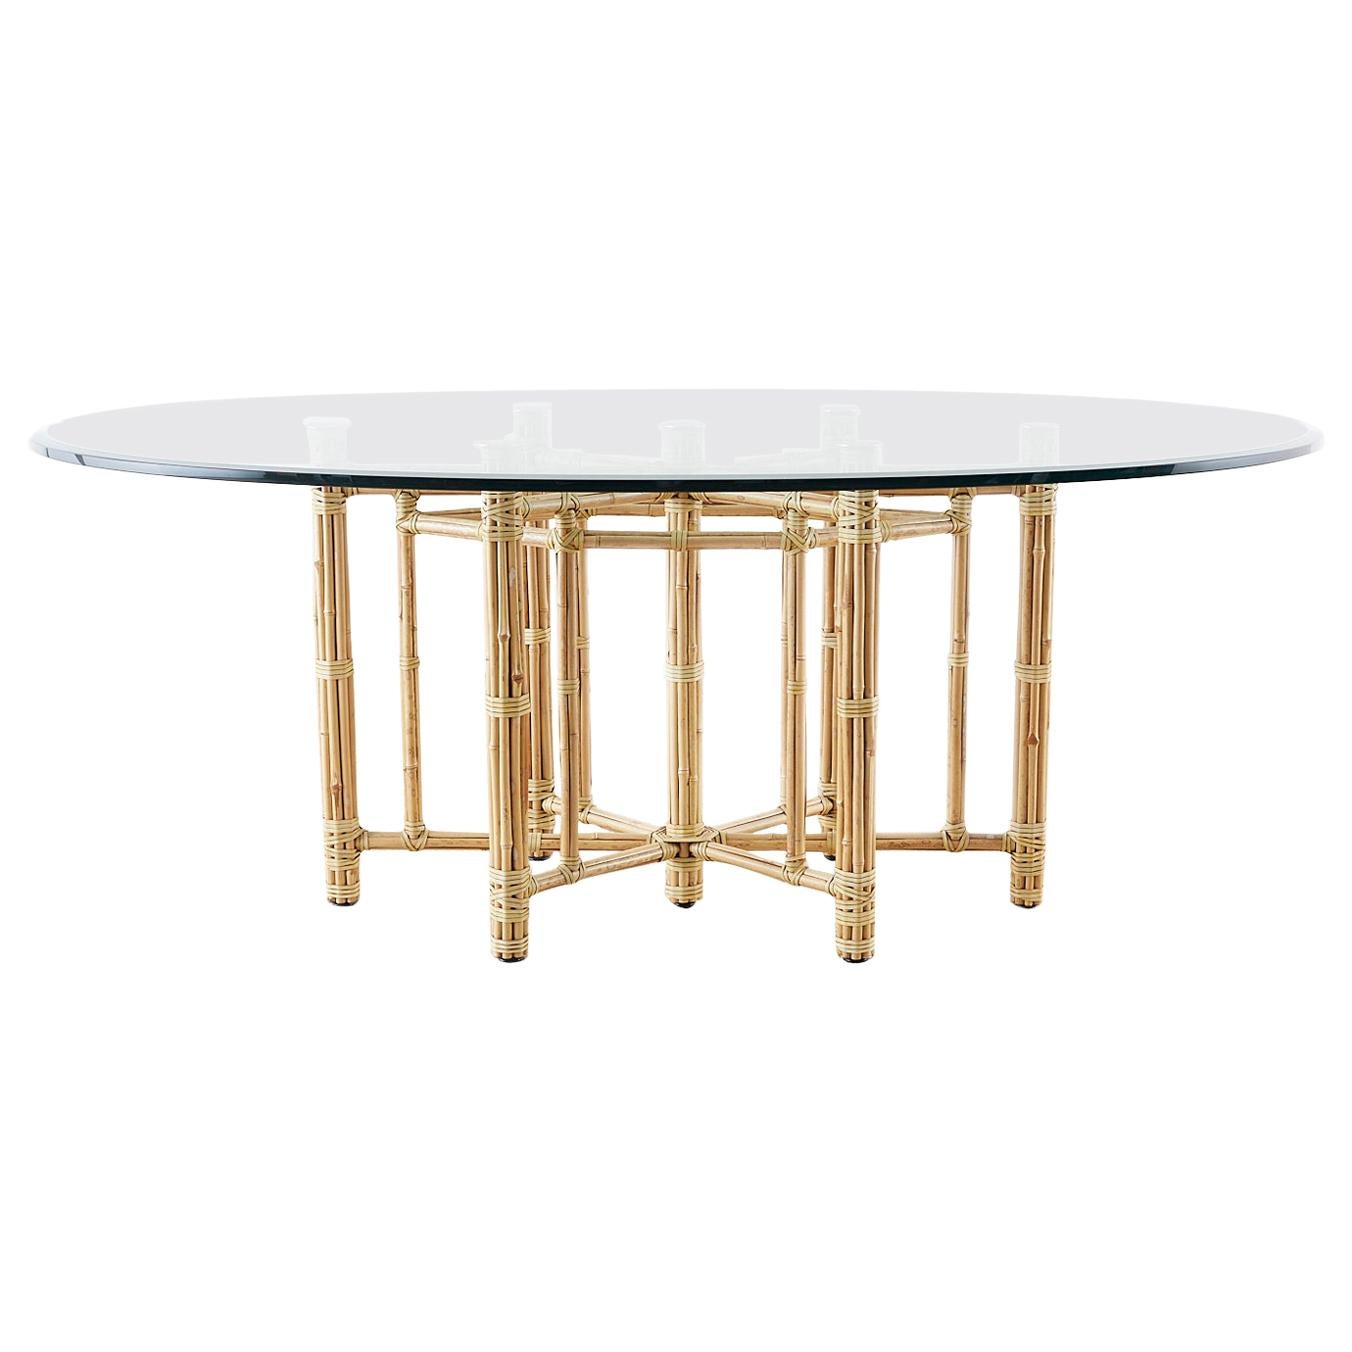 McGuire California Modern Bamboo Rattan Oval Dining Table